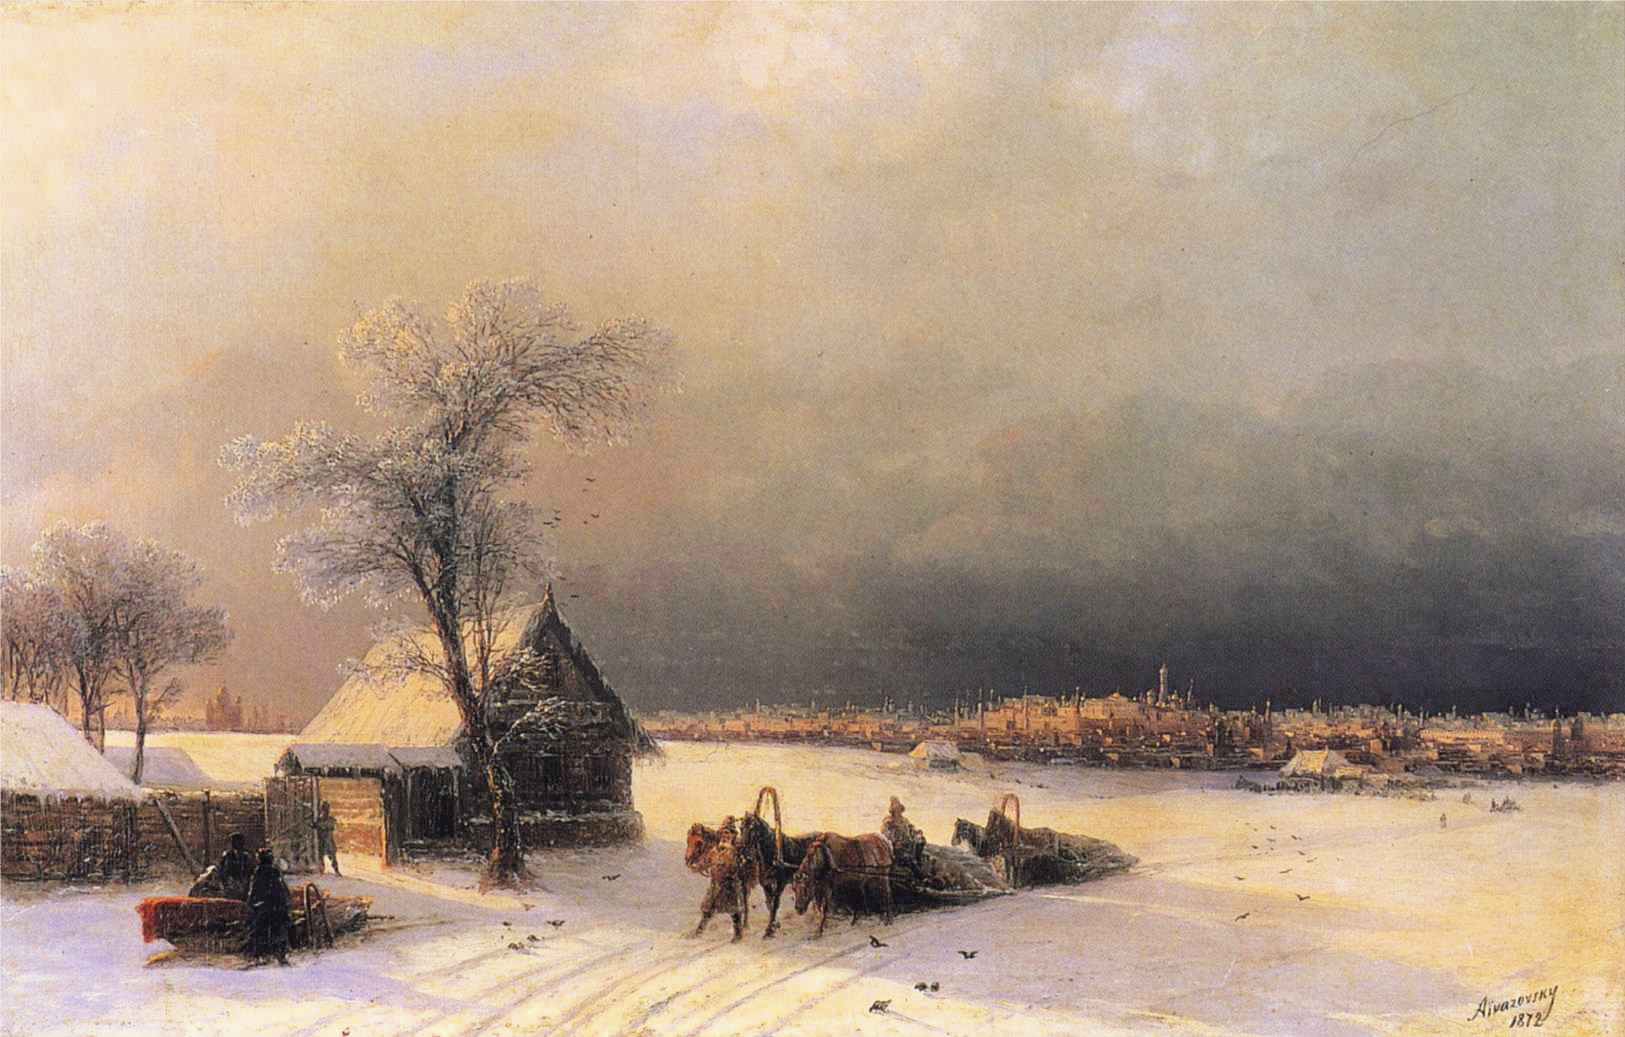 Moscow in Winter from the Sparrow Hills (1872).